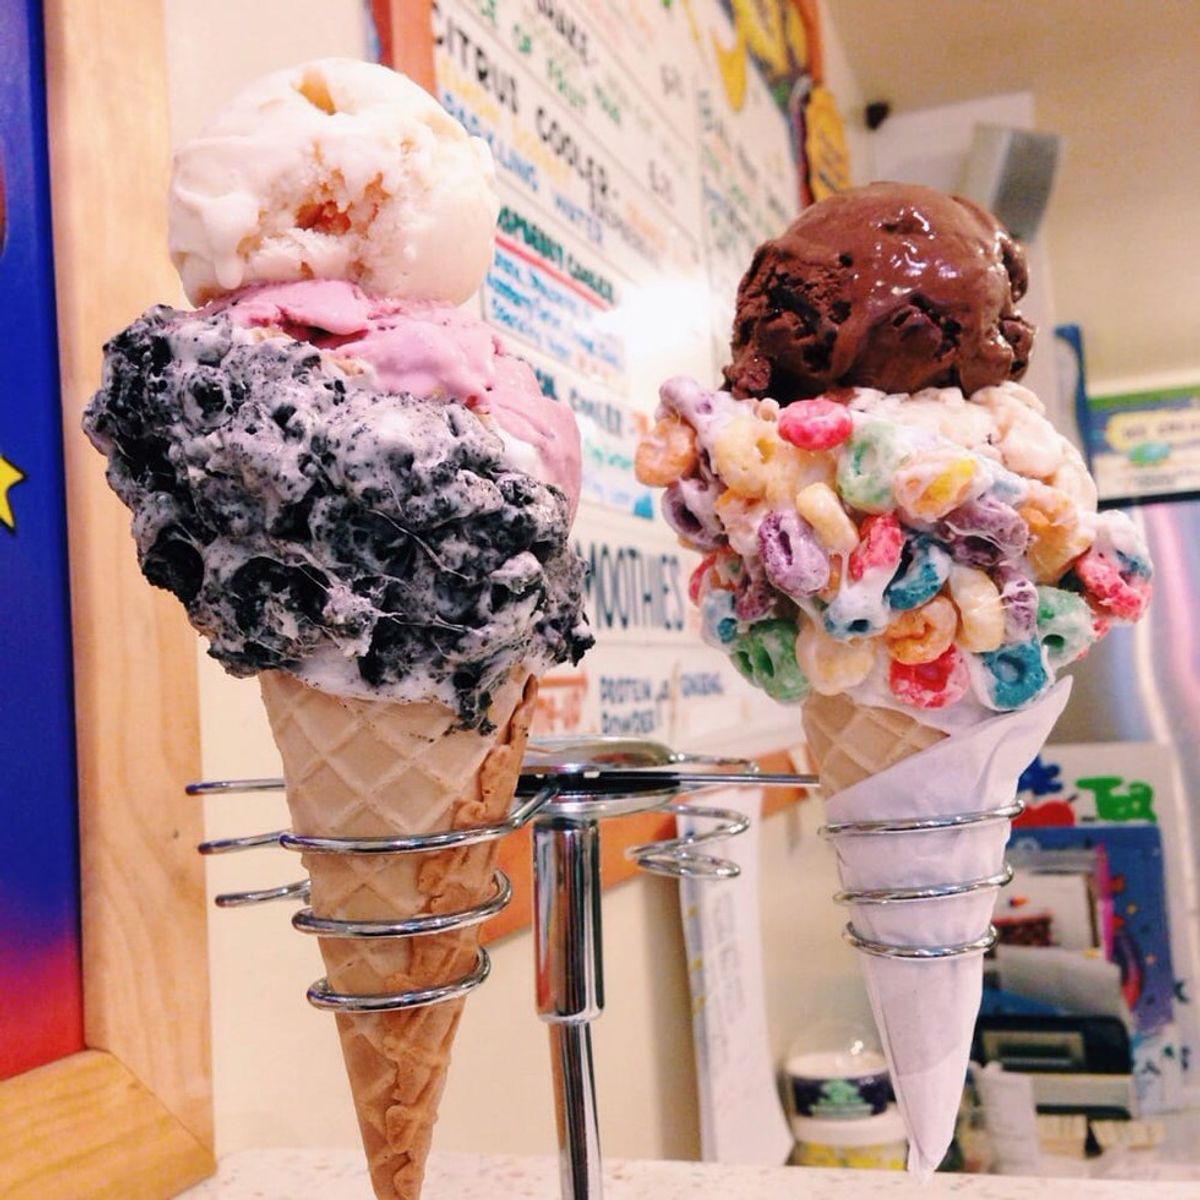 10 Ice Cream Places You Need To Visit In NYC